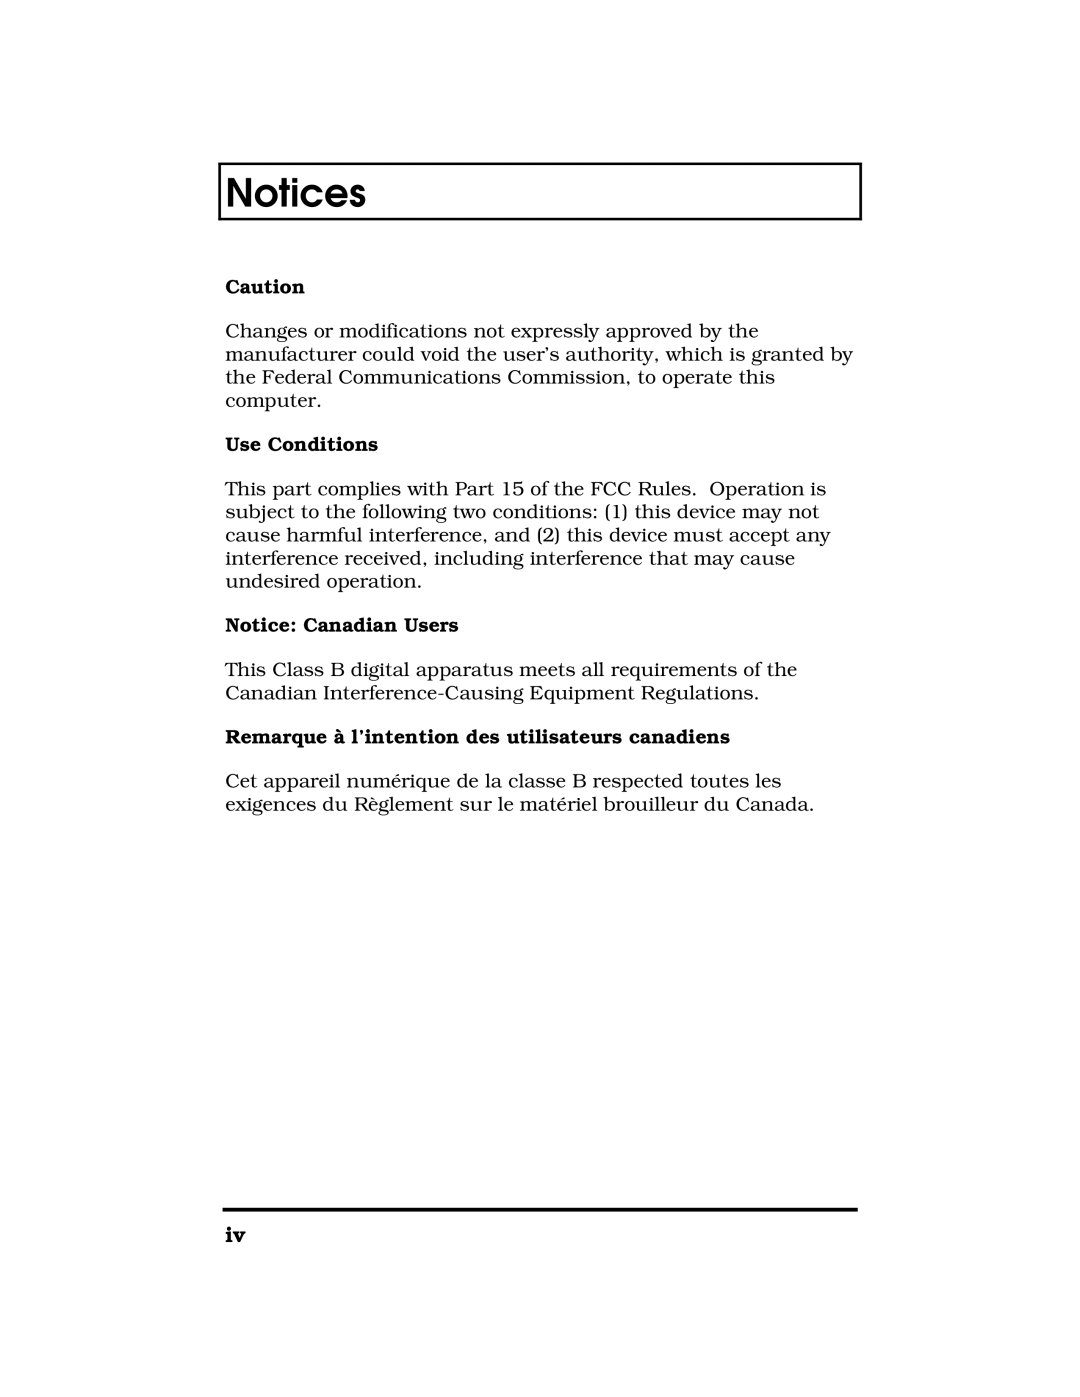 Acer 390 Series manual Notices, Use Conditions, Notice Canadian Users, Remarque à l’intention des utilisateurs canadiens 